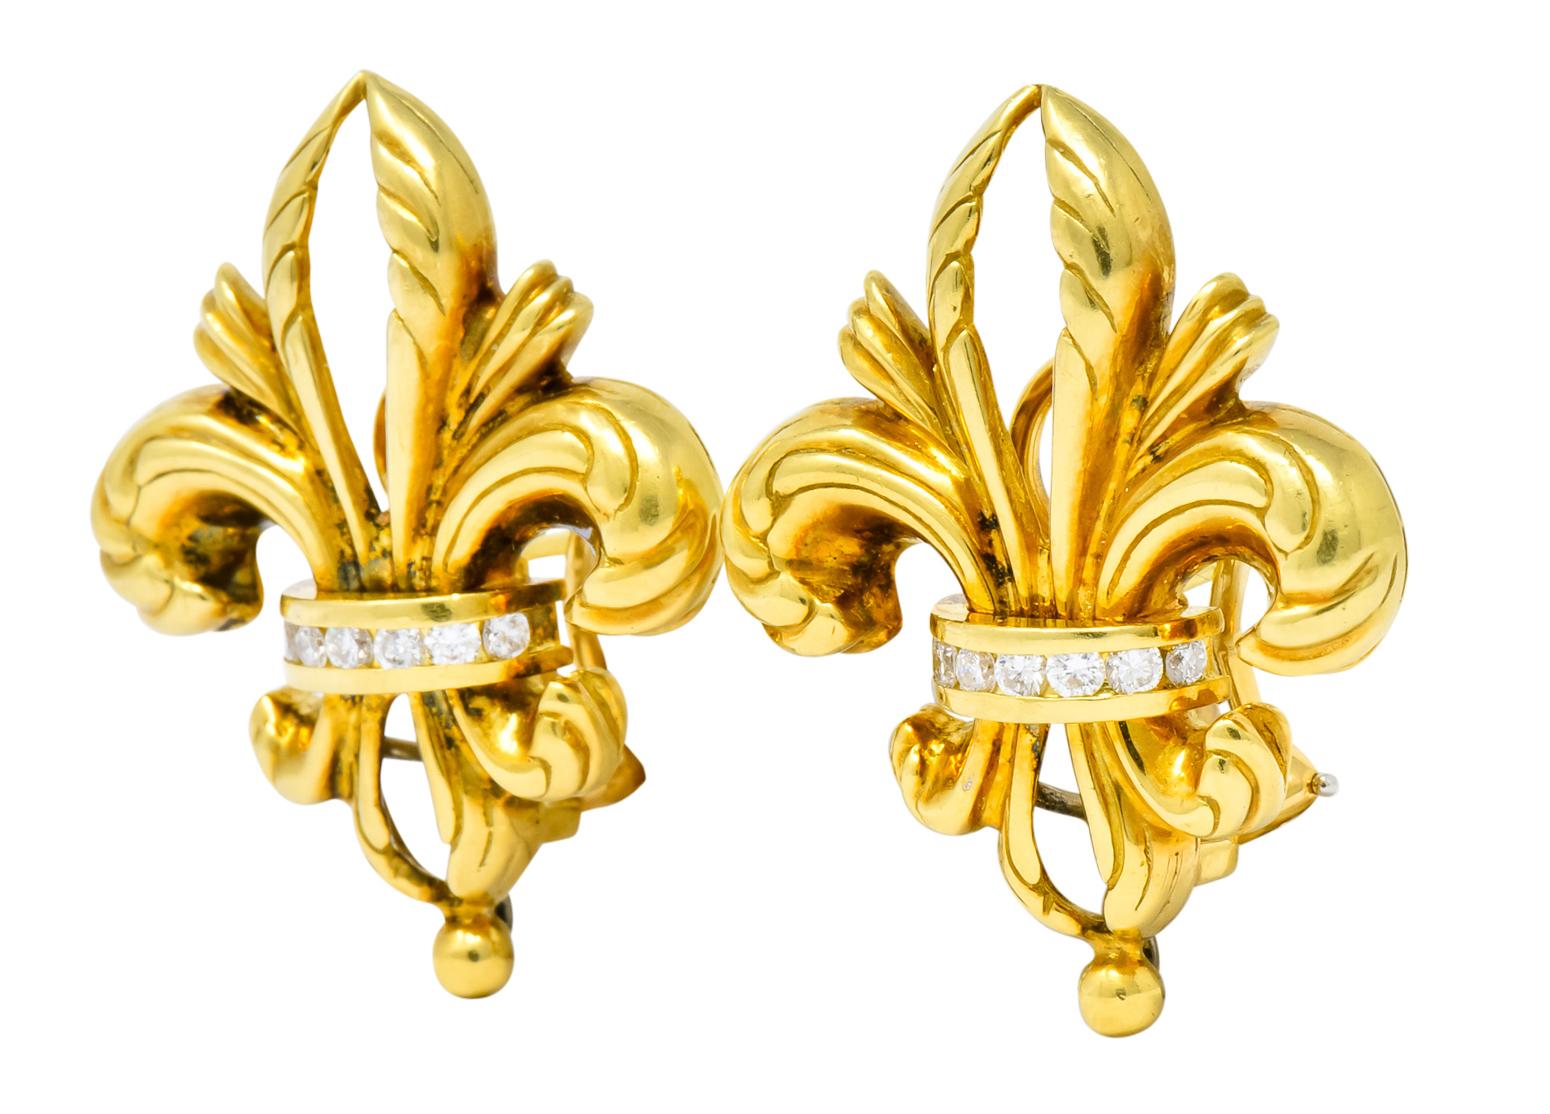 Earrings designed as high polished fleur-de-lis with scrolling foliate motif

Each centering channel set round brilliant cut diamonds weighing approximately 0.30 carat total, G/H color and VS clarity

With signature gold caviar bead at